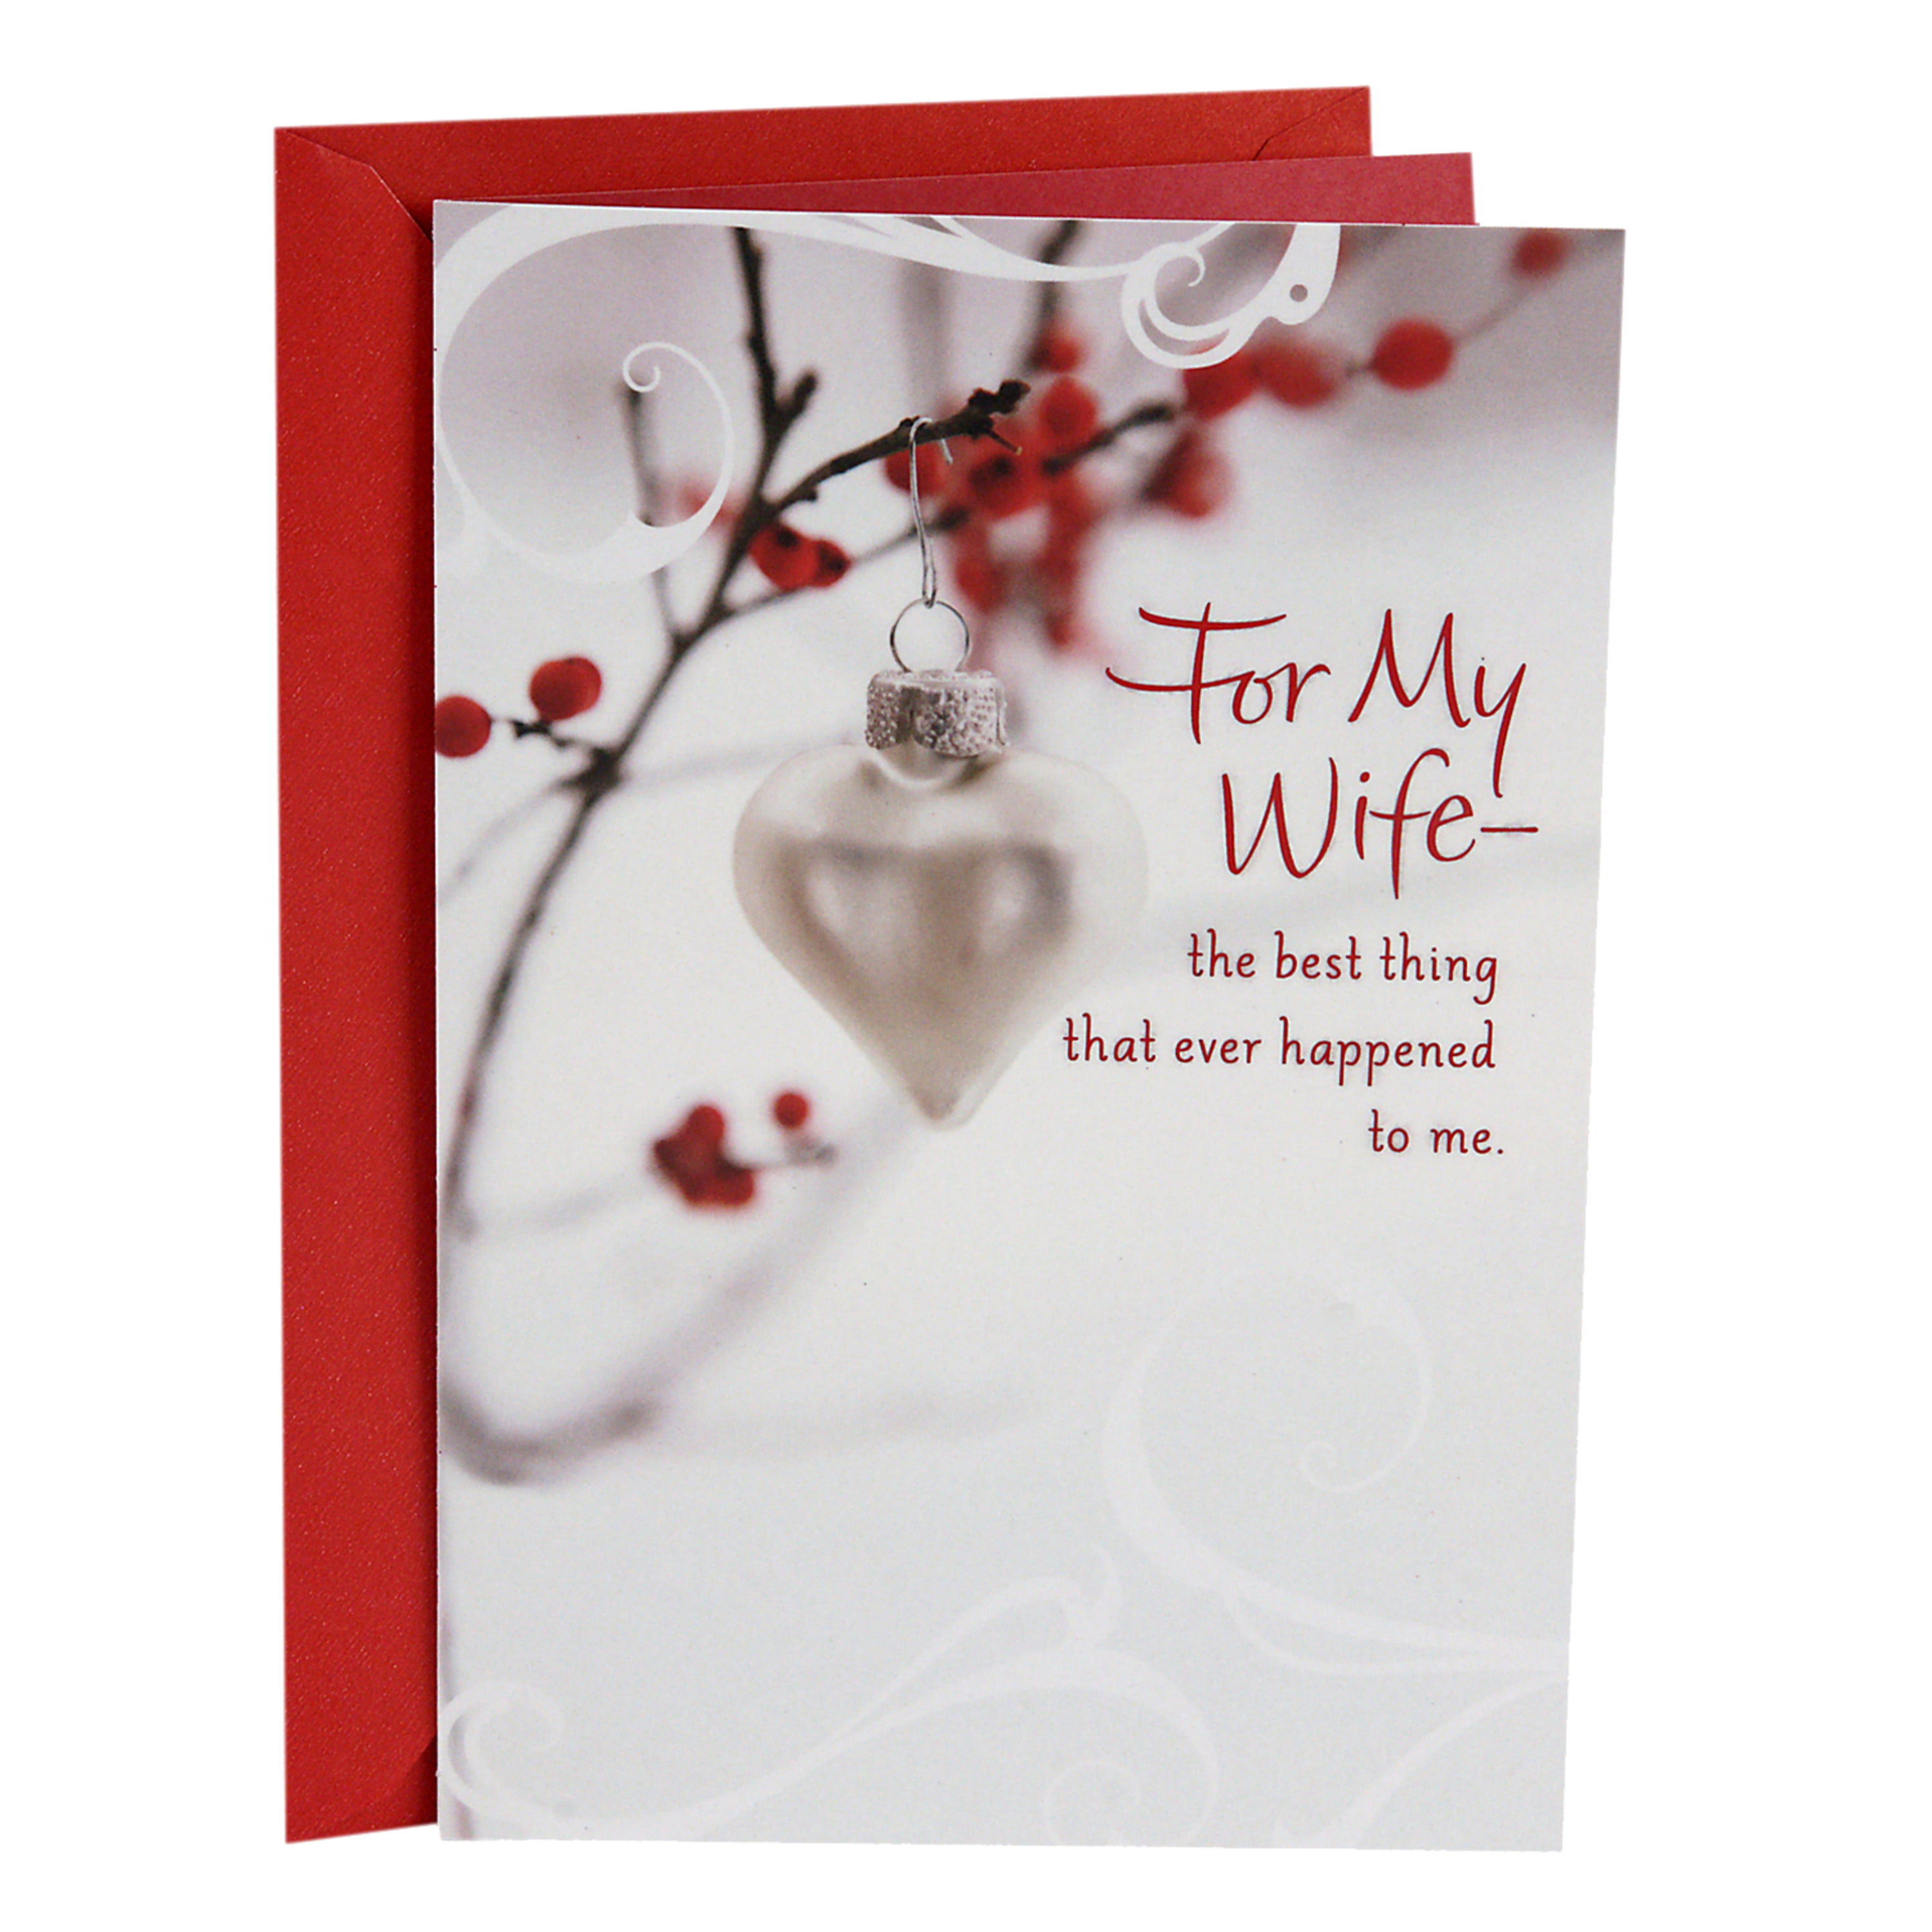 Christmas Card for Wife from Hallmark Watercolour Design with Heartfelt Sentiment